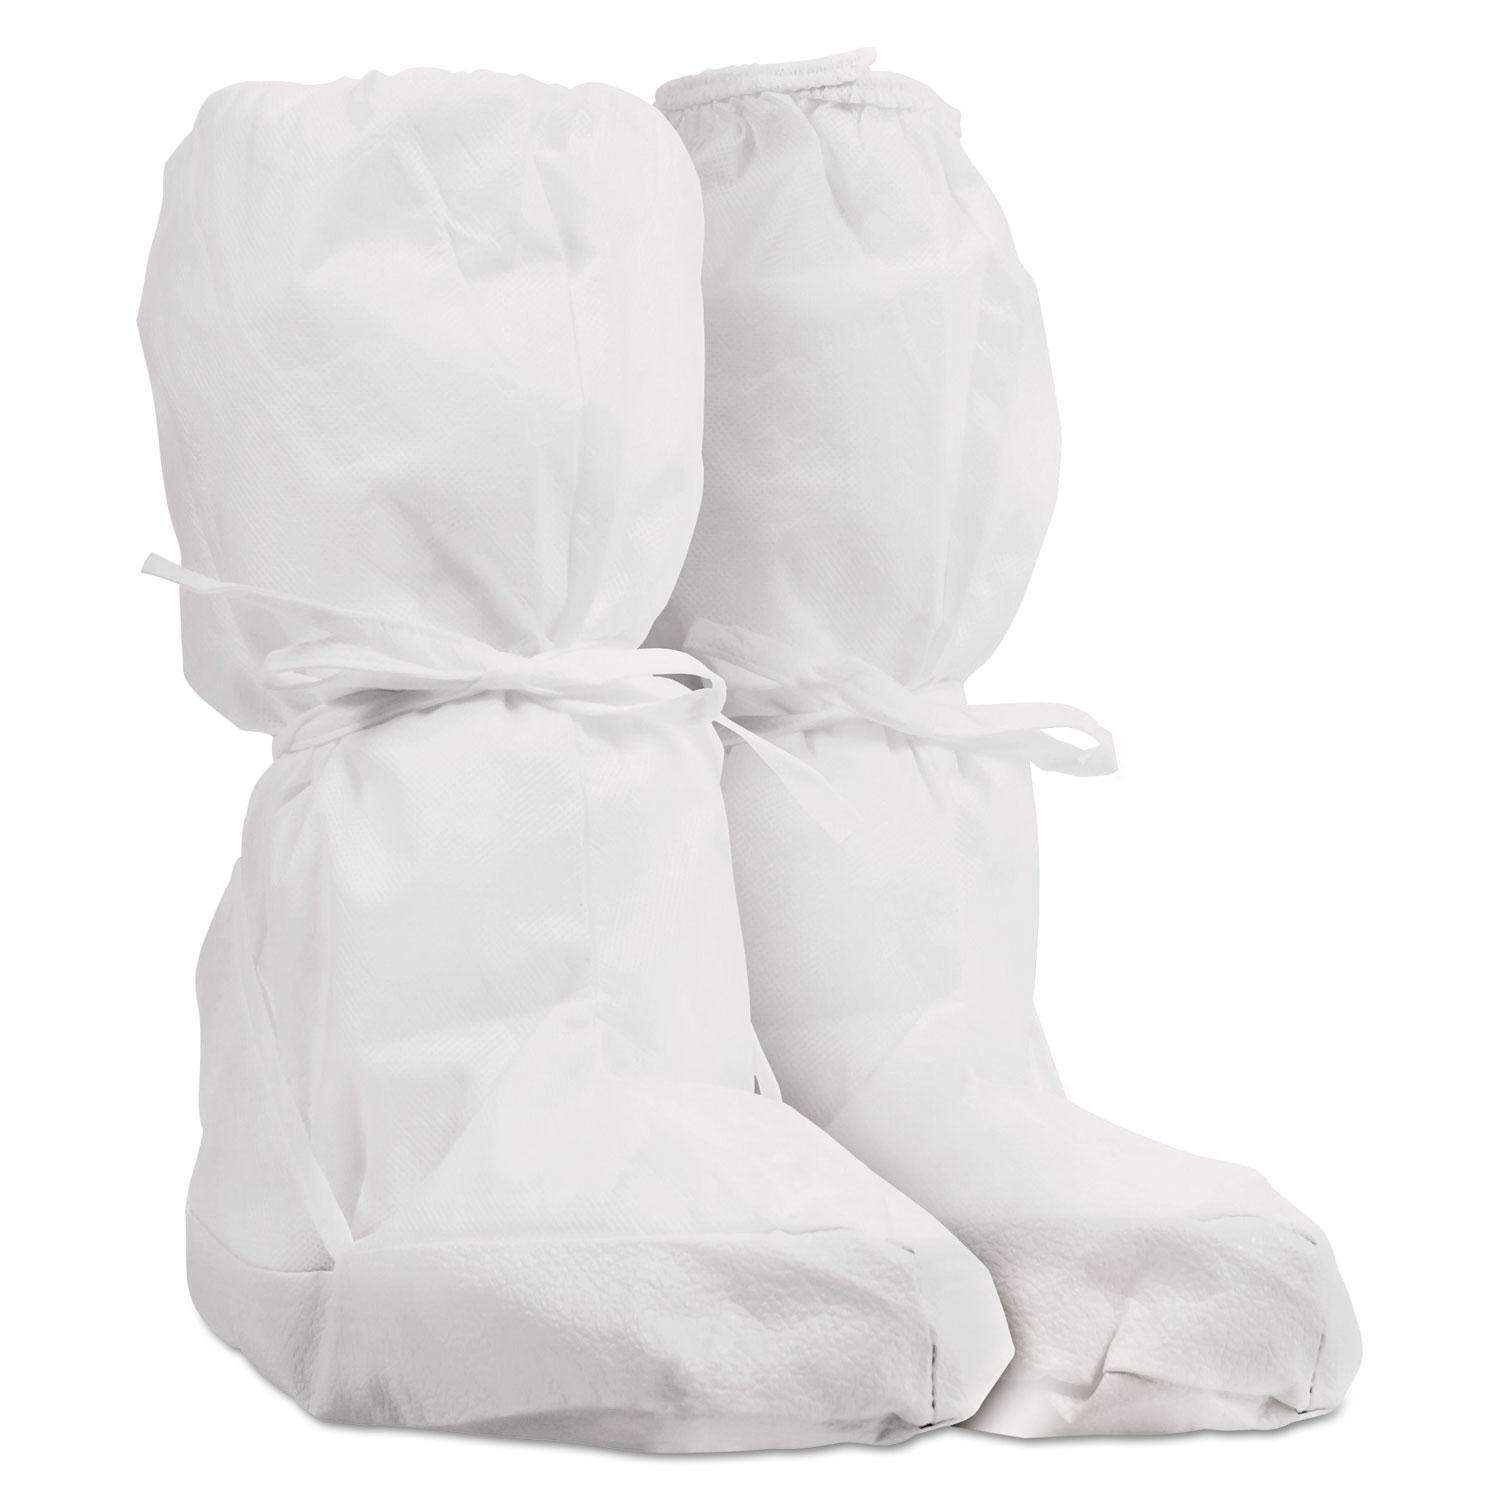 Pure A5 Sterile Boot Covers, White, One Size Fits All, 100/Carton